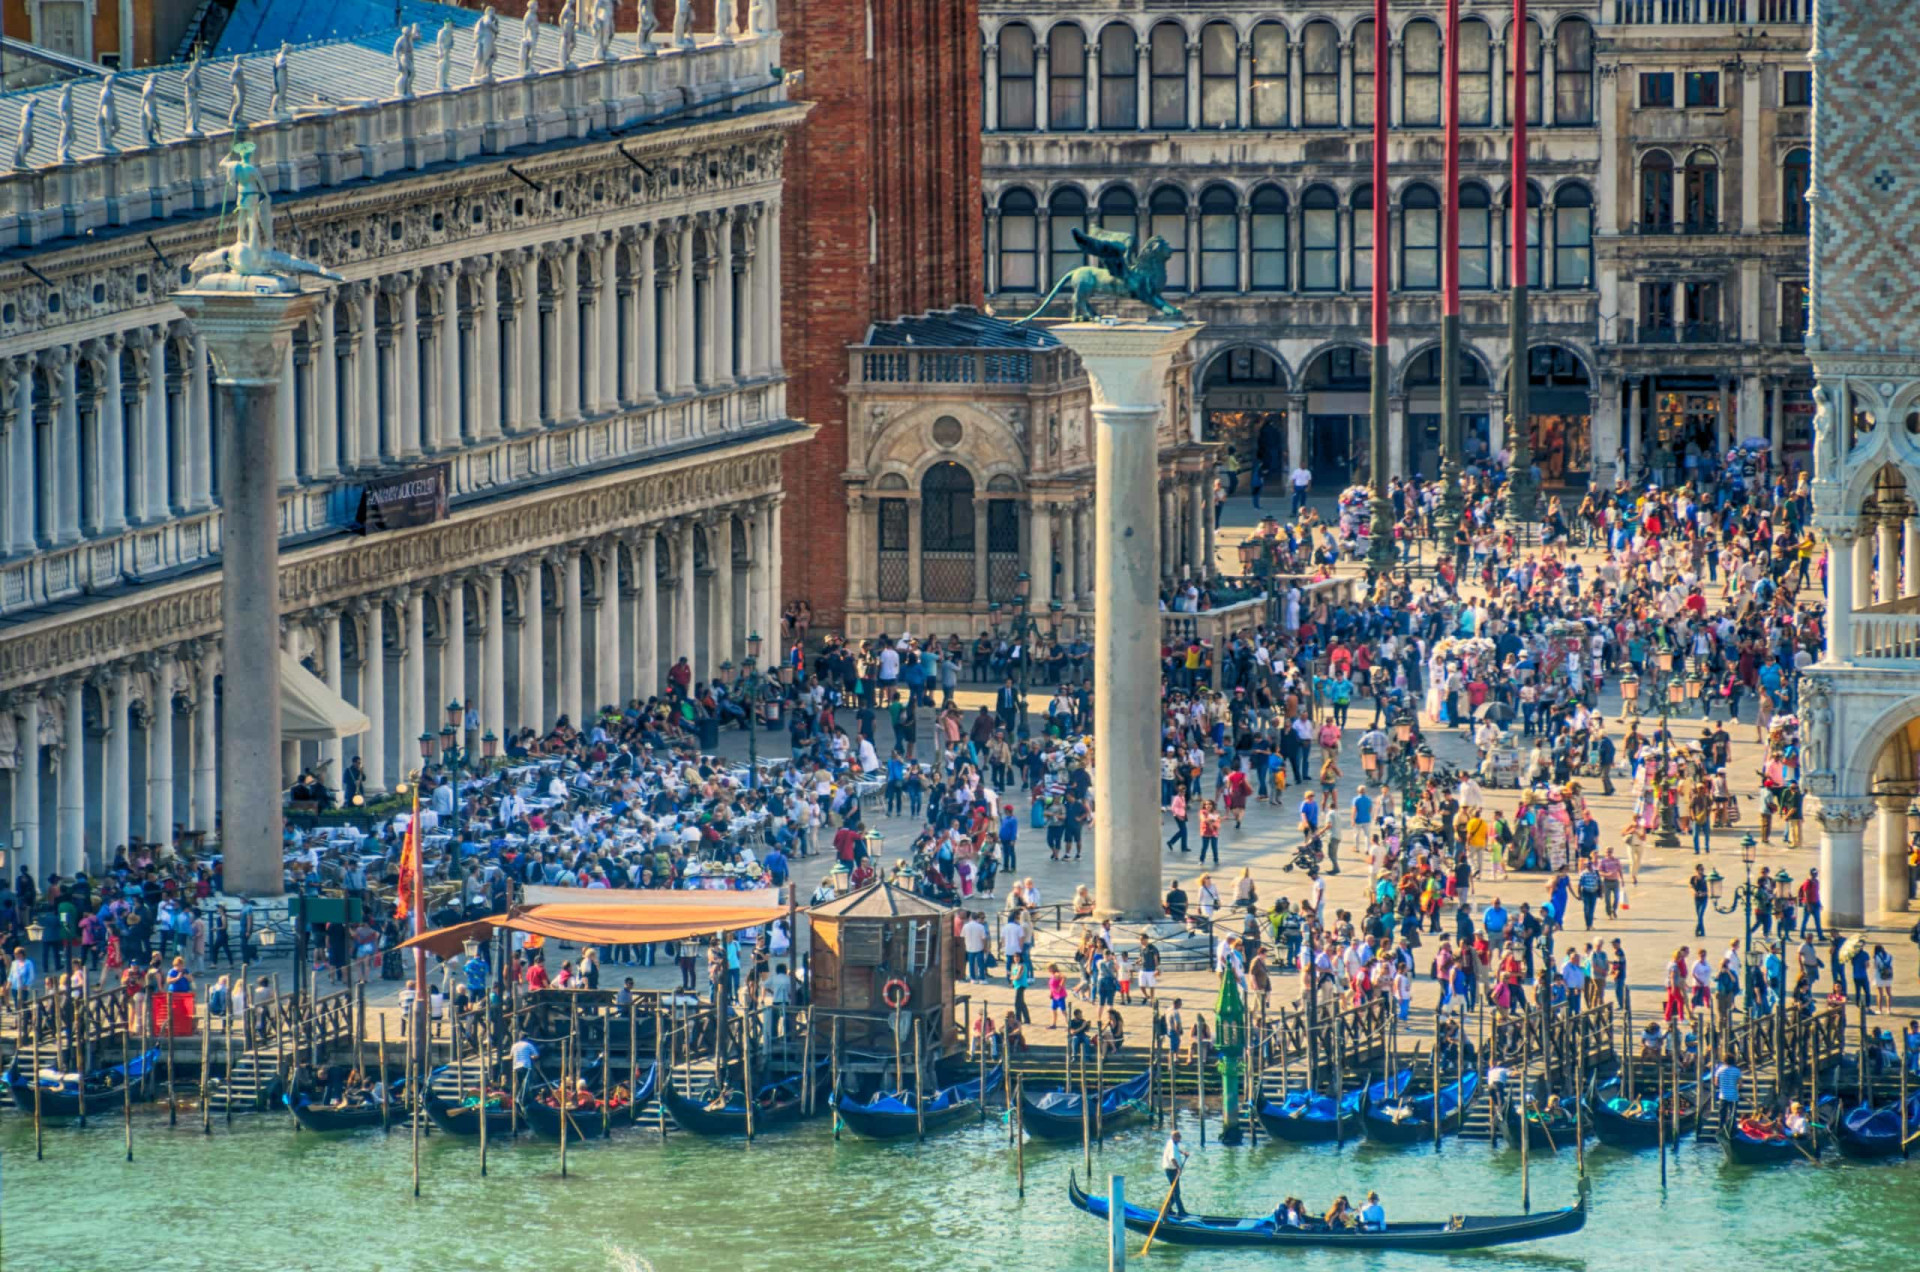 <p>Venice is a city long plagued by overcrowding, receiving up to 60,000 visitors a day. Rules are now in place banning antisocial behavior, and it's forbidden to sit or lie on the steps of bridges and in the doorways of historic monuments. In 2022, the city revealed plans to implement a tourist tax for those entering the city starting from 2023 in an effort to combat overtourism. The destination is also having to deal with the increased threat of flooding.</p><p>You may also like:<a href="https://www.starsinsider.com/n/221847?utm_source=msn.com&utm_medium=display&utm_campaign=referral_description&utm_content=668561en-my"> The Last Supper: famous final feasts</a></p>